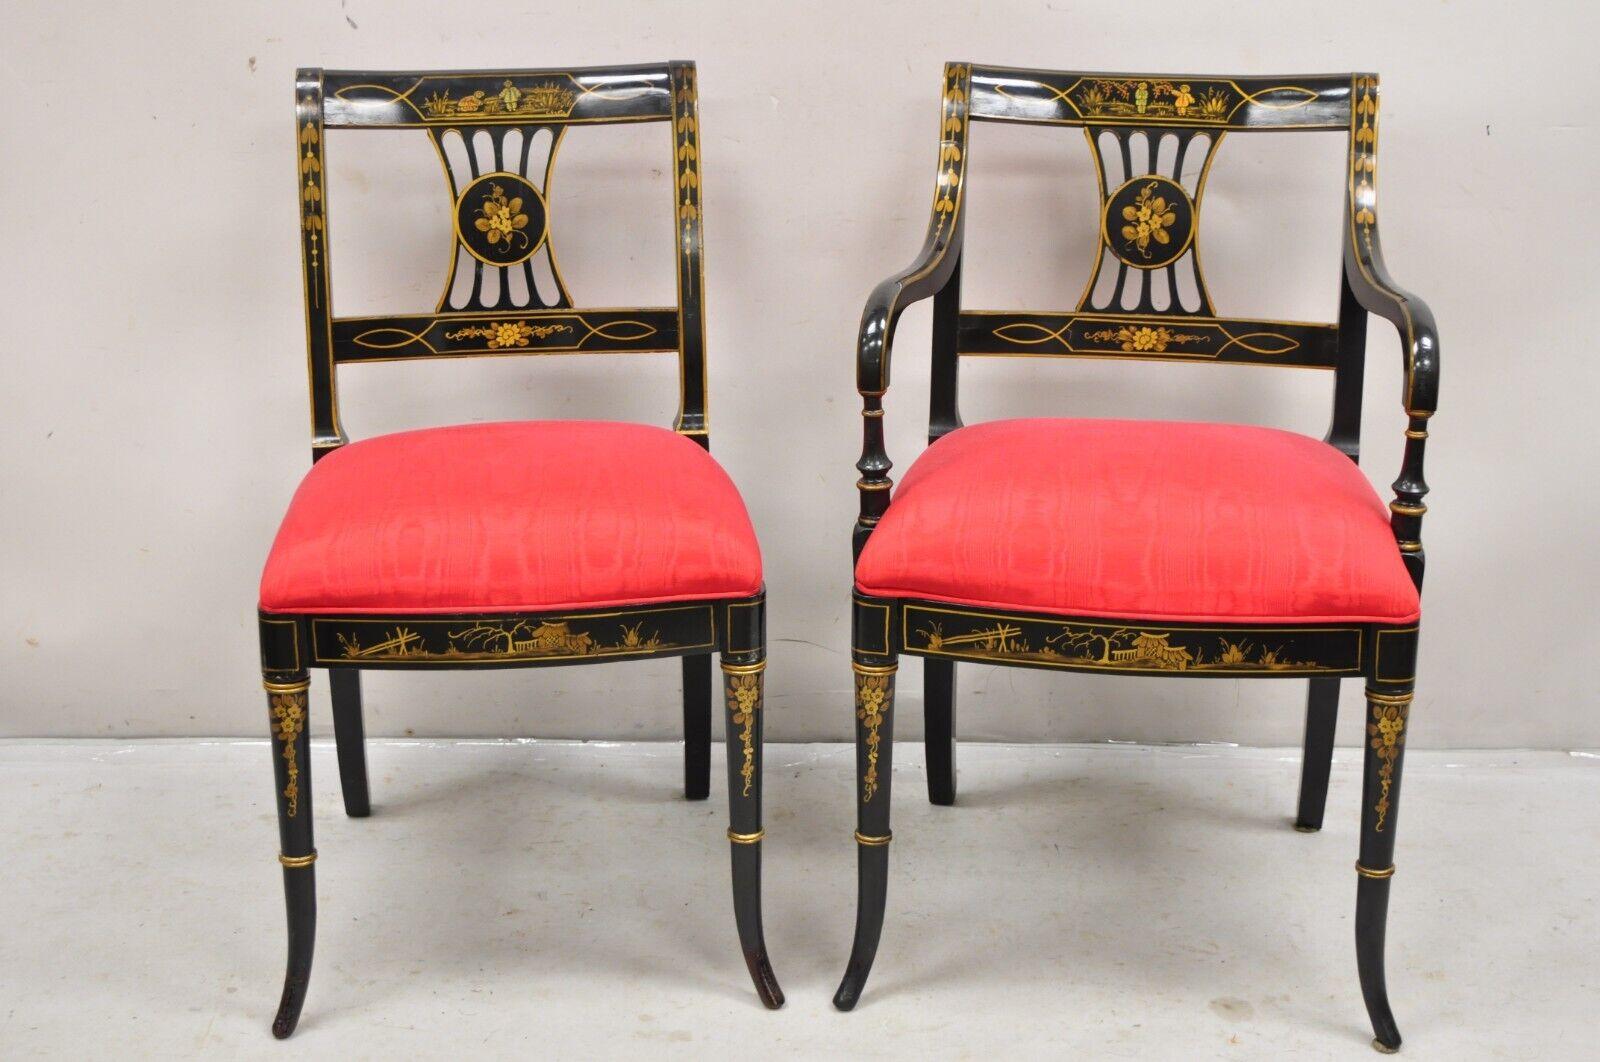 Set of 6 Vintage Chinoiserie English Regency Style Black Hand Painted Dining Chairs. Believed to be by Union National Furniture Co. Set includes 2 Armchairs, 4 side chairs, hand painted details, saber legs, red upholstered seats, very nice quality